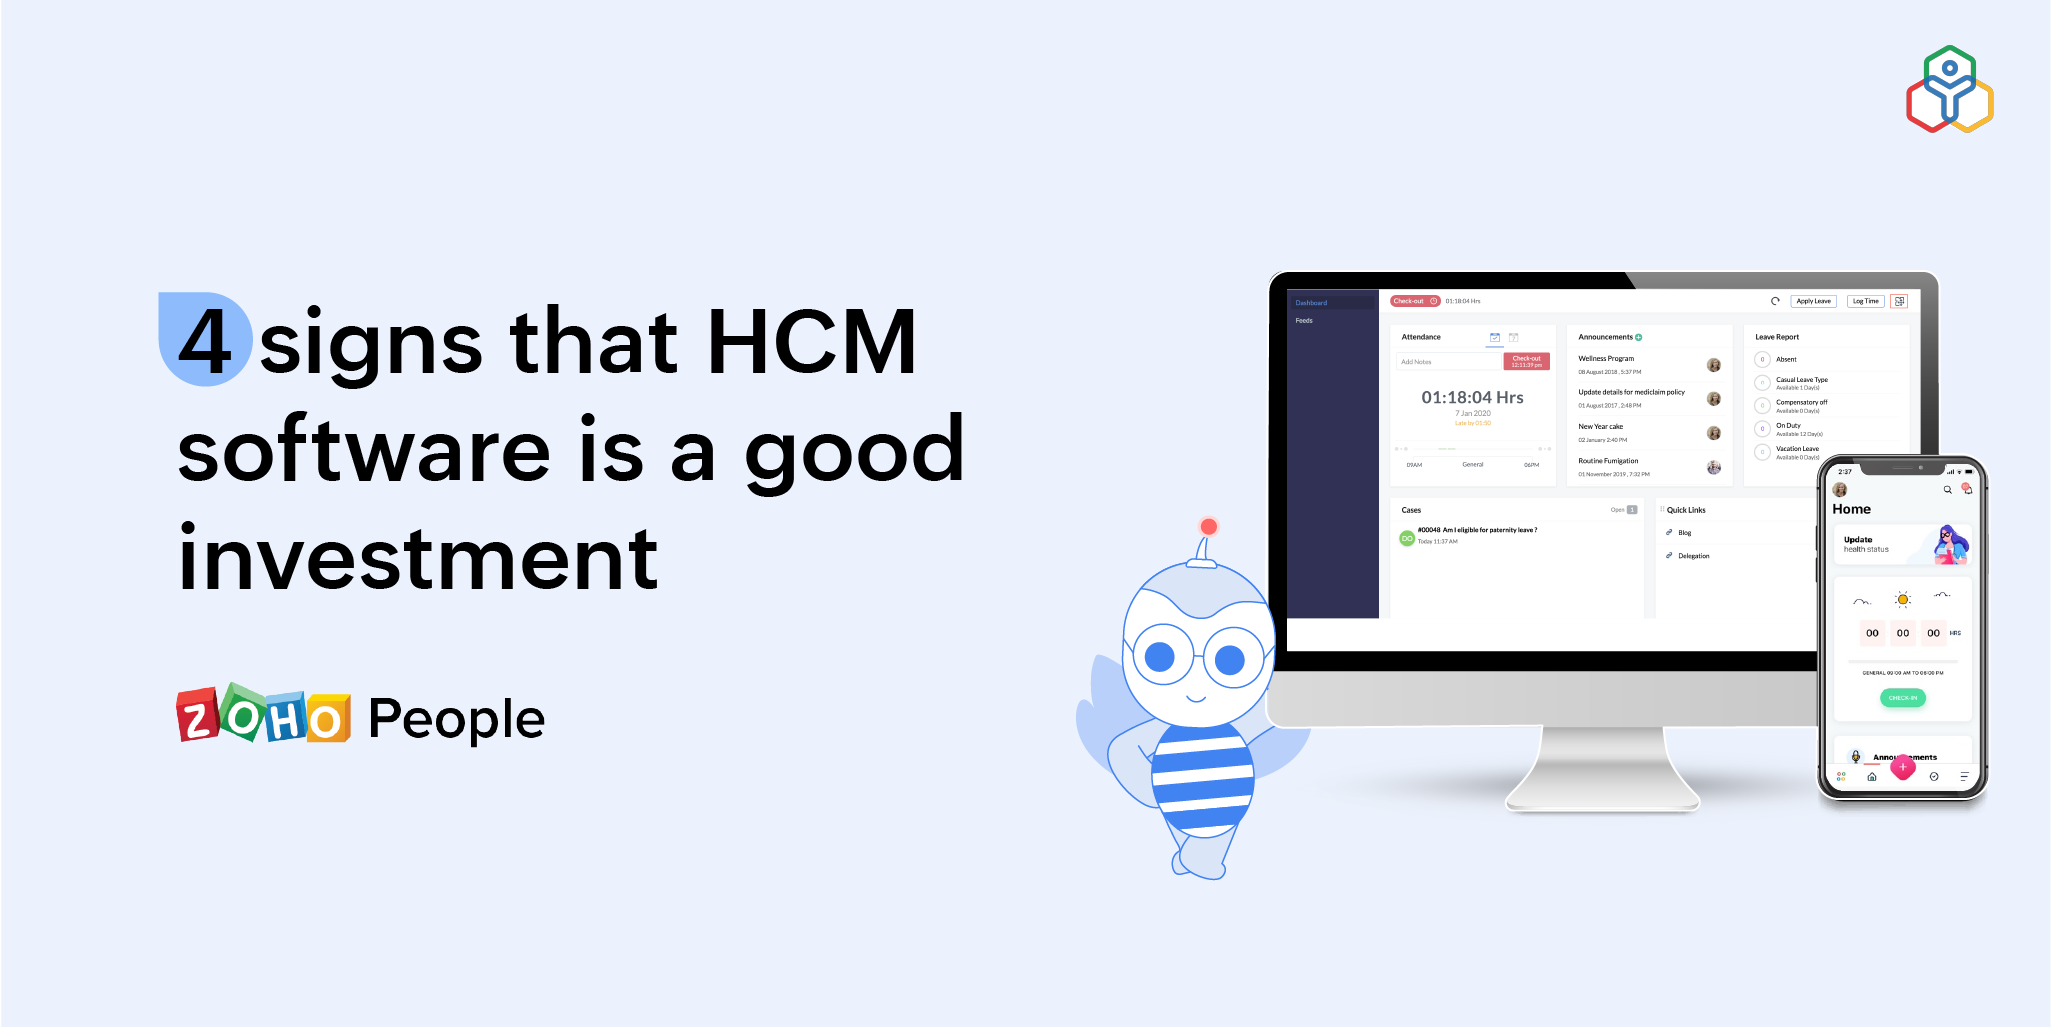 4 signs that HCM software is good investment